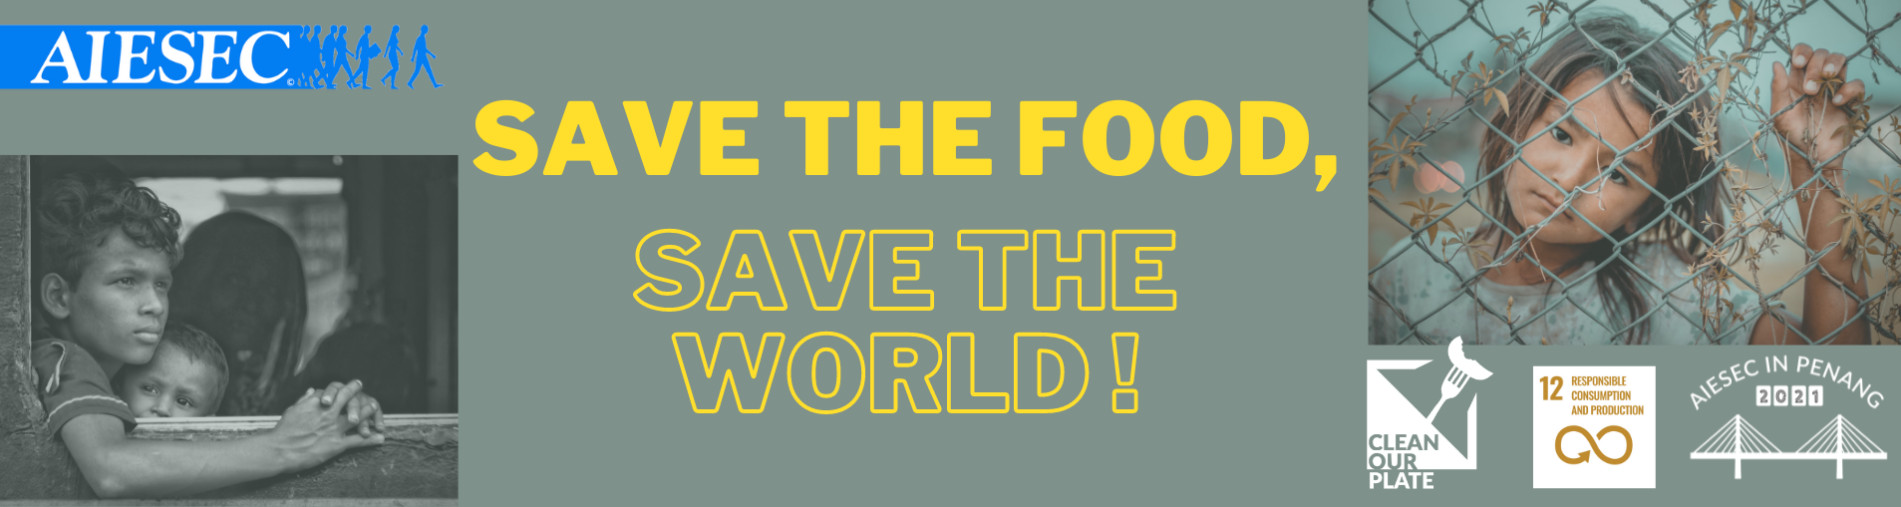 Save the food, Save the world!